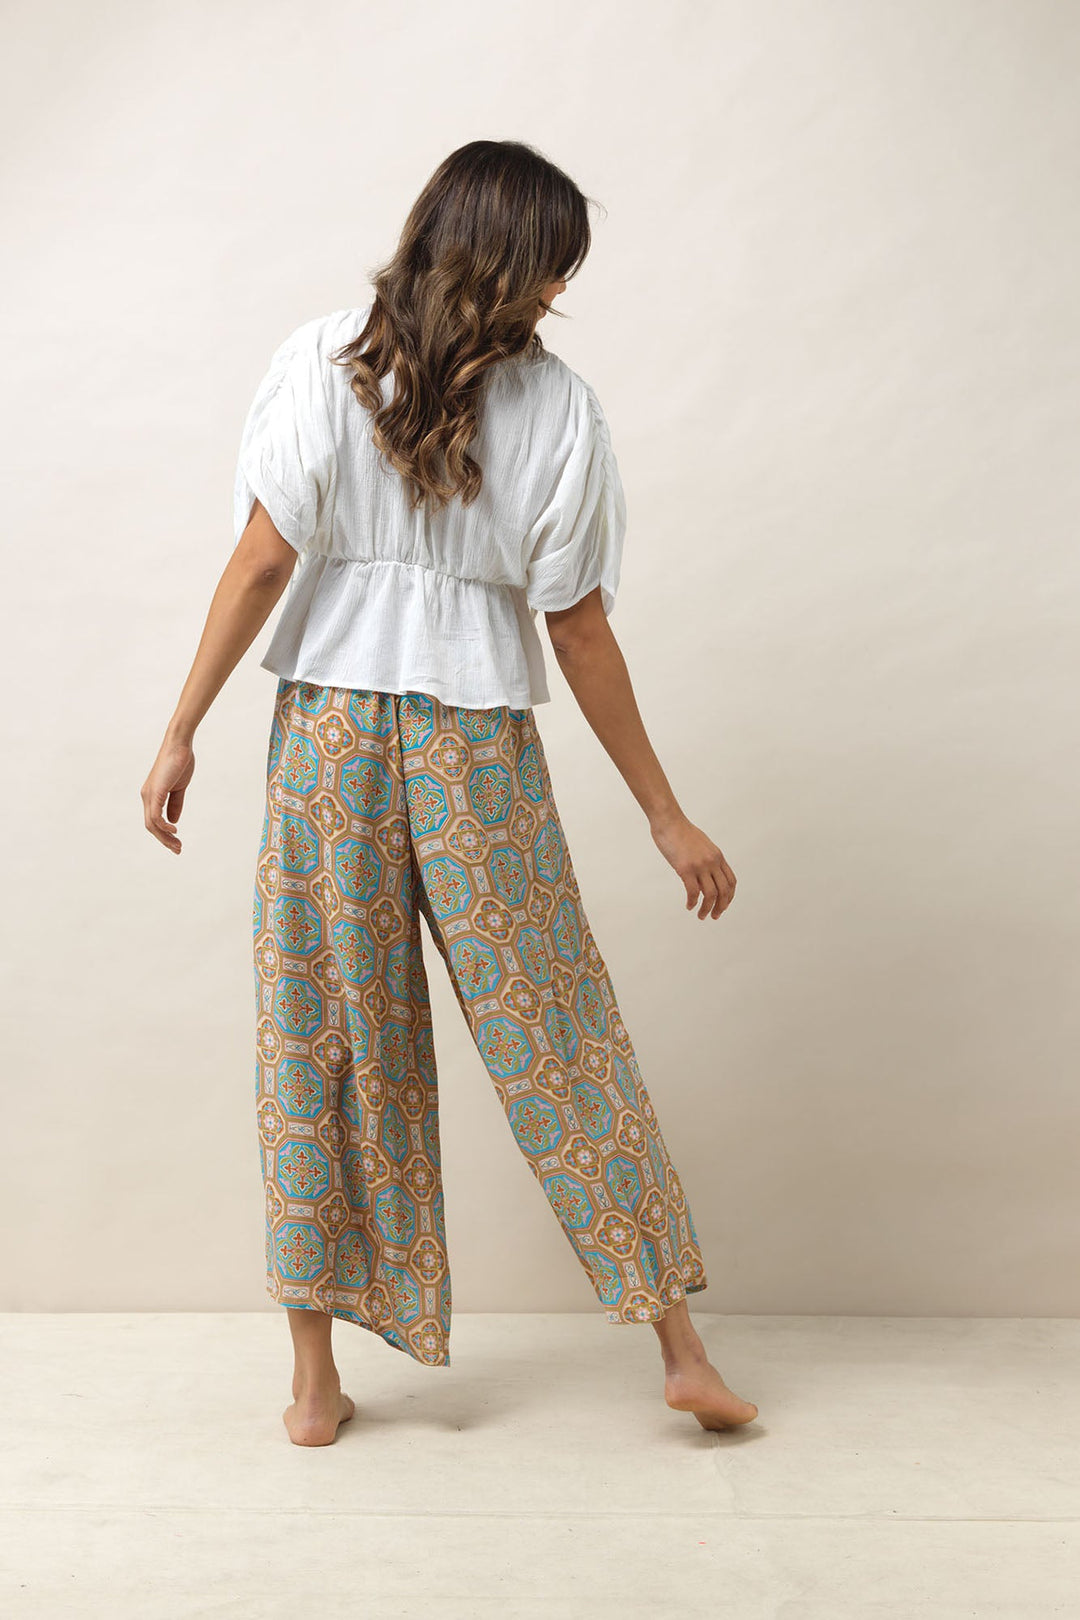 Women's palazzo trouser pants in vintage tiles blue print by One Hundred Stars